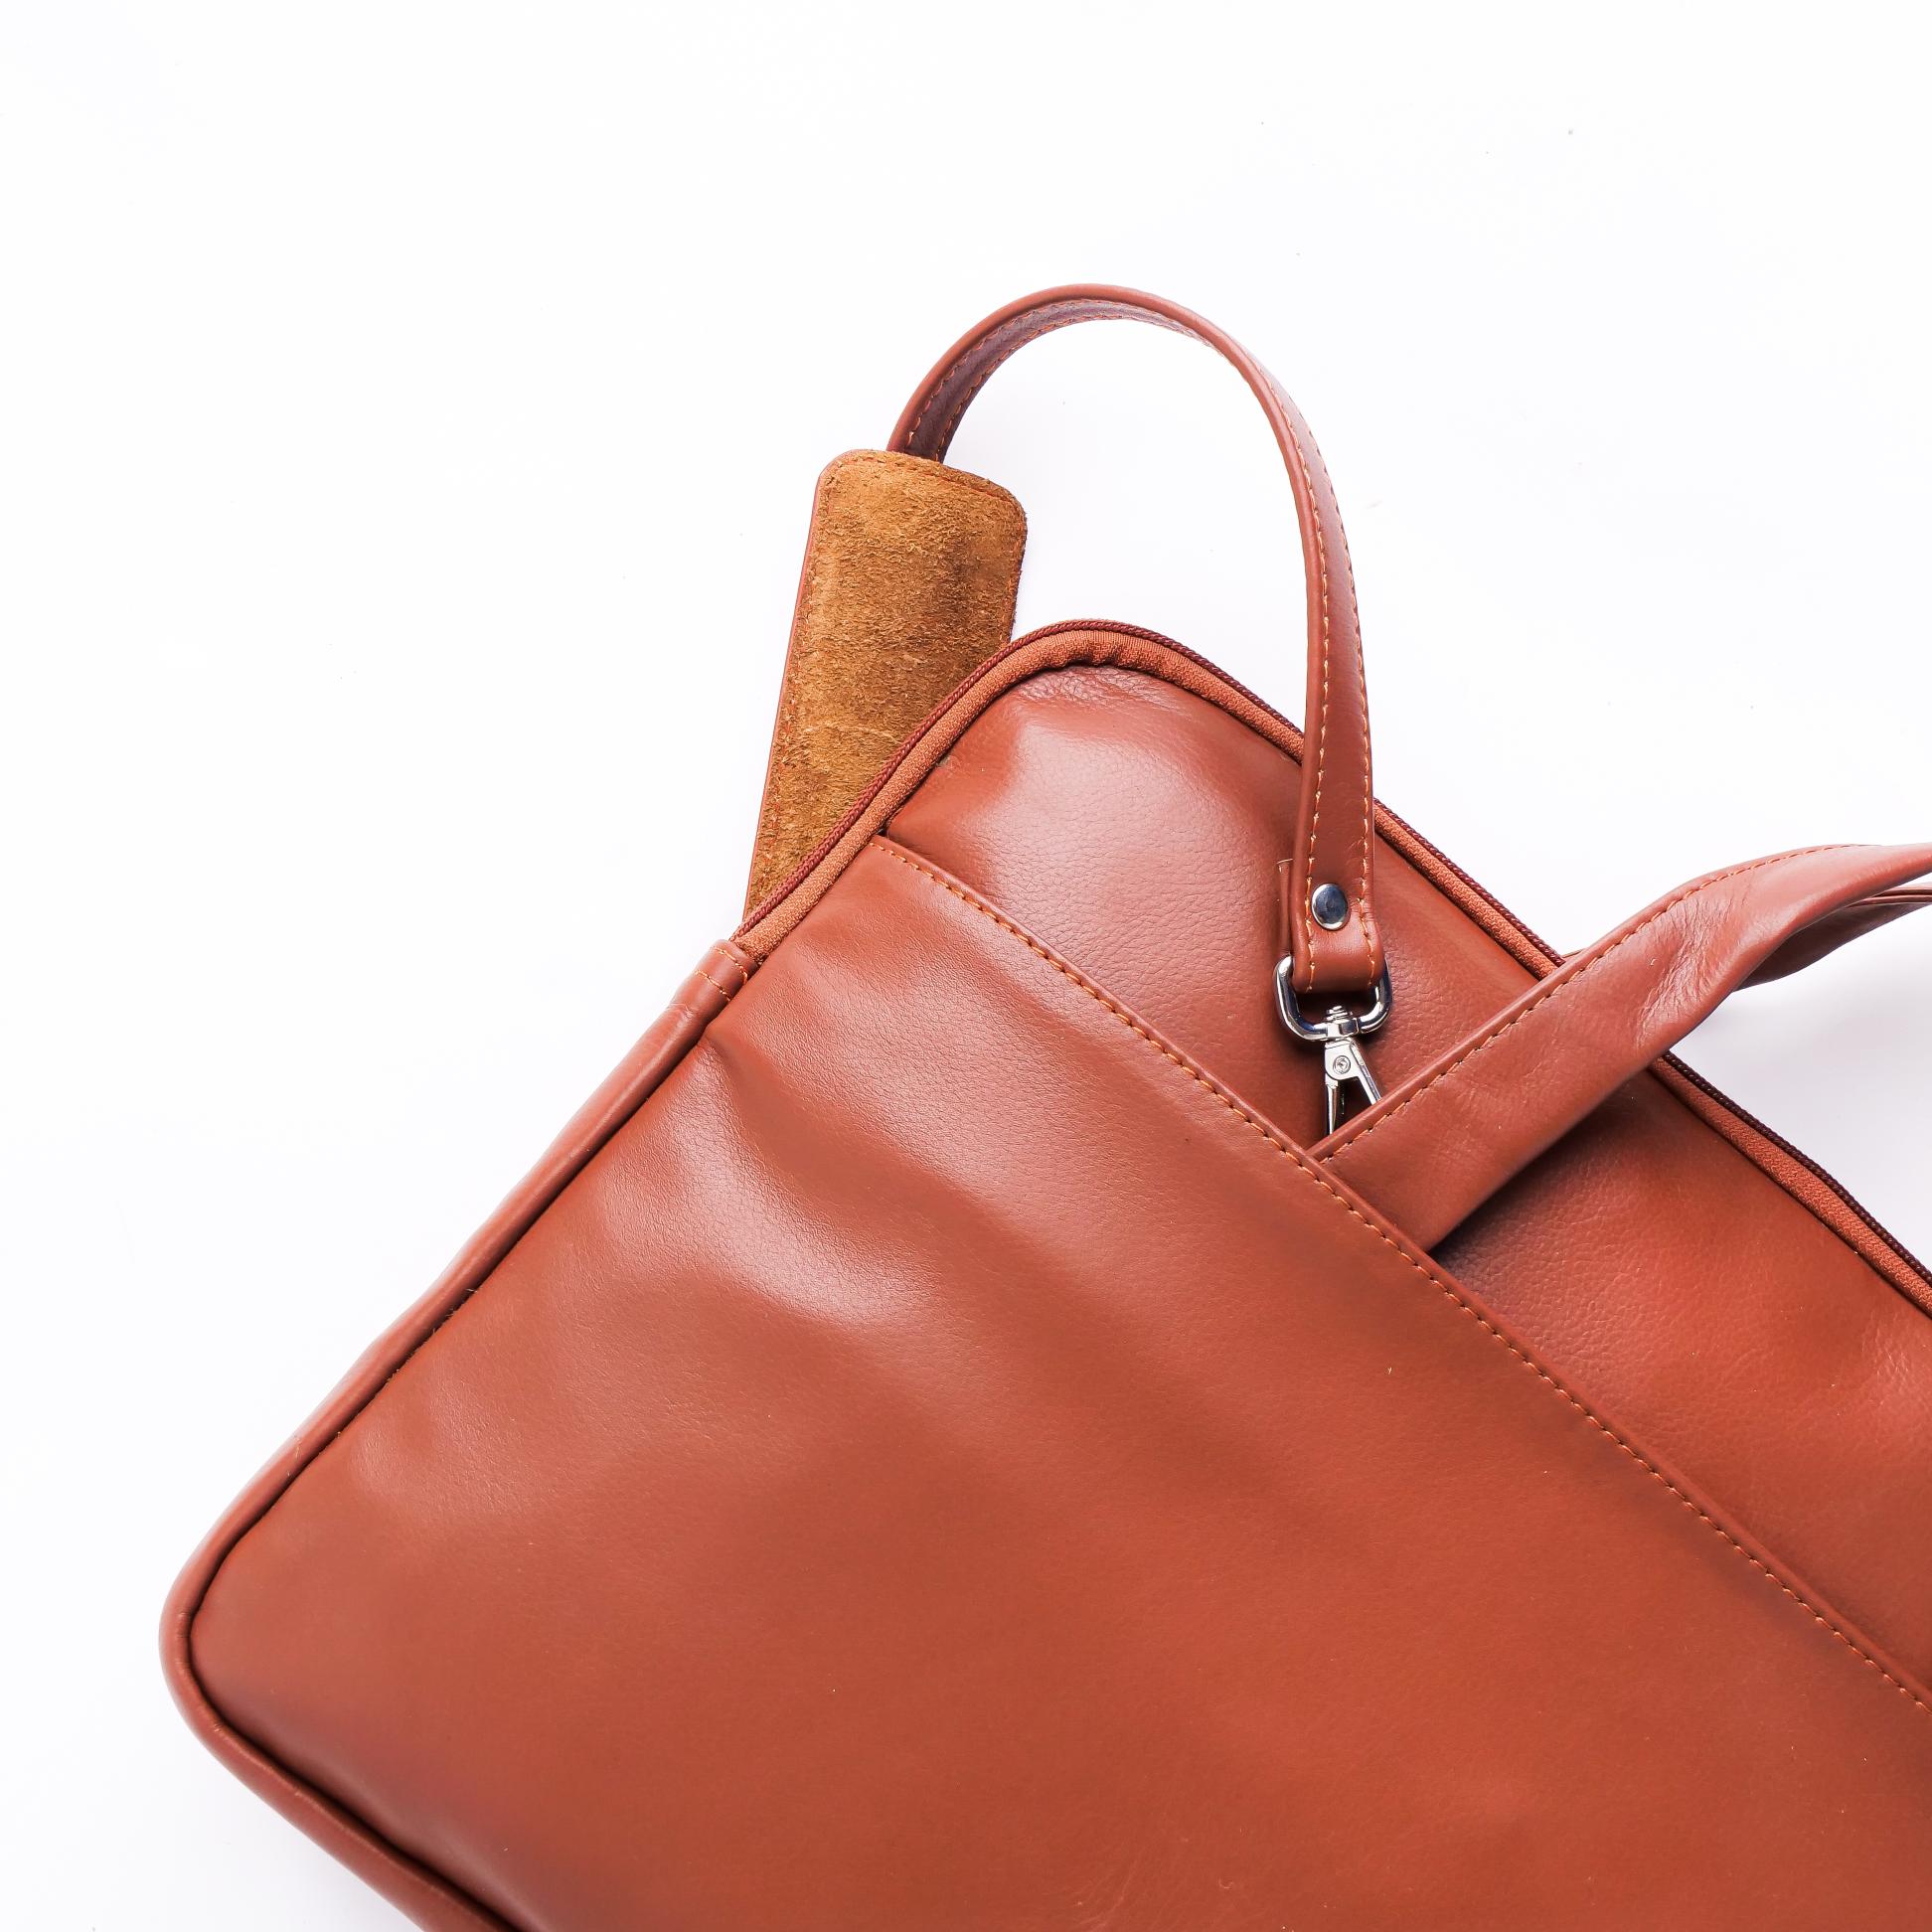 The Founder Ultra Slim Leather Laptop Bag-Tan Brown